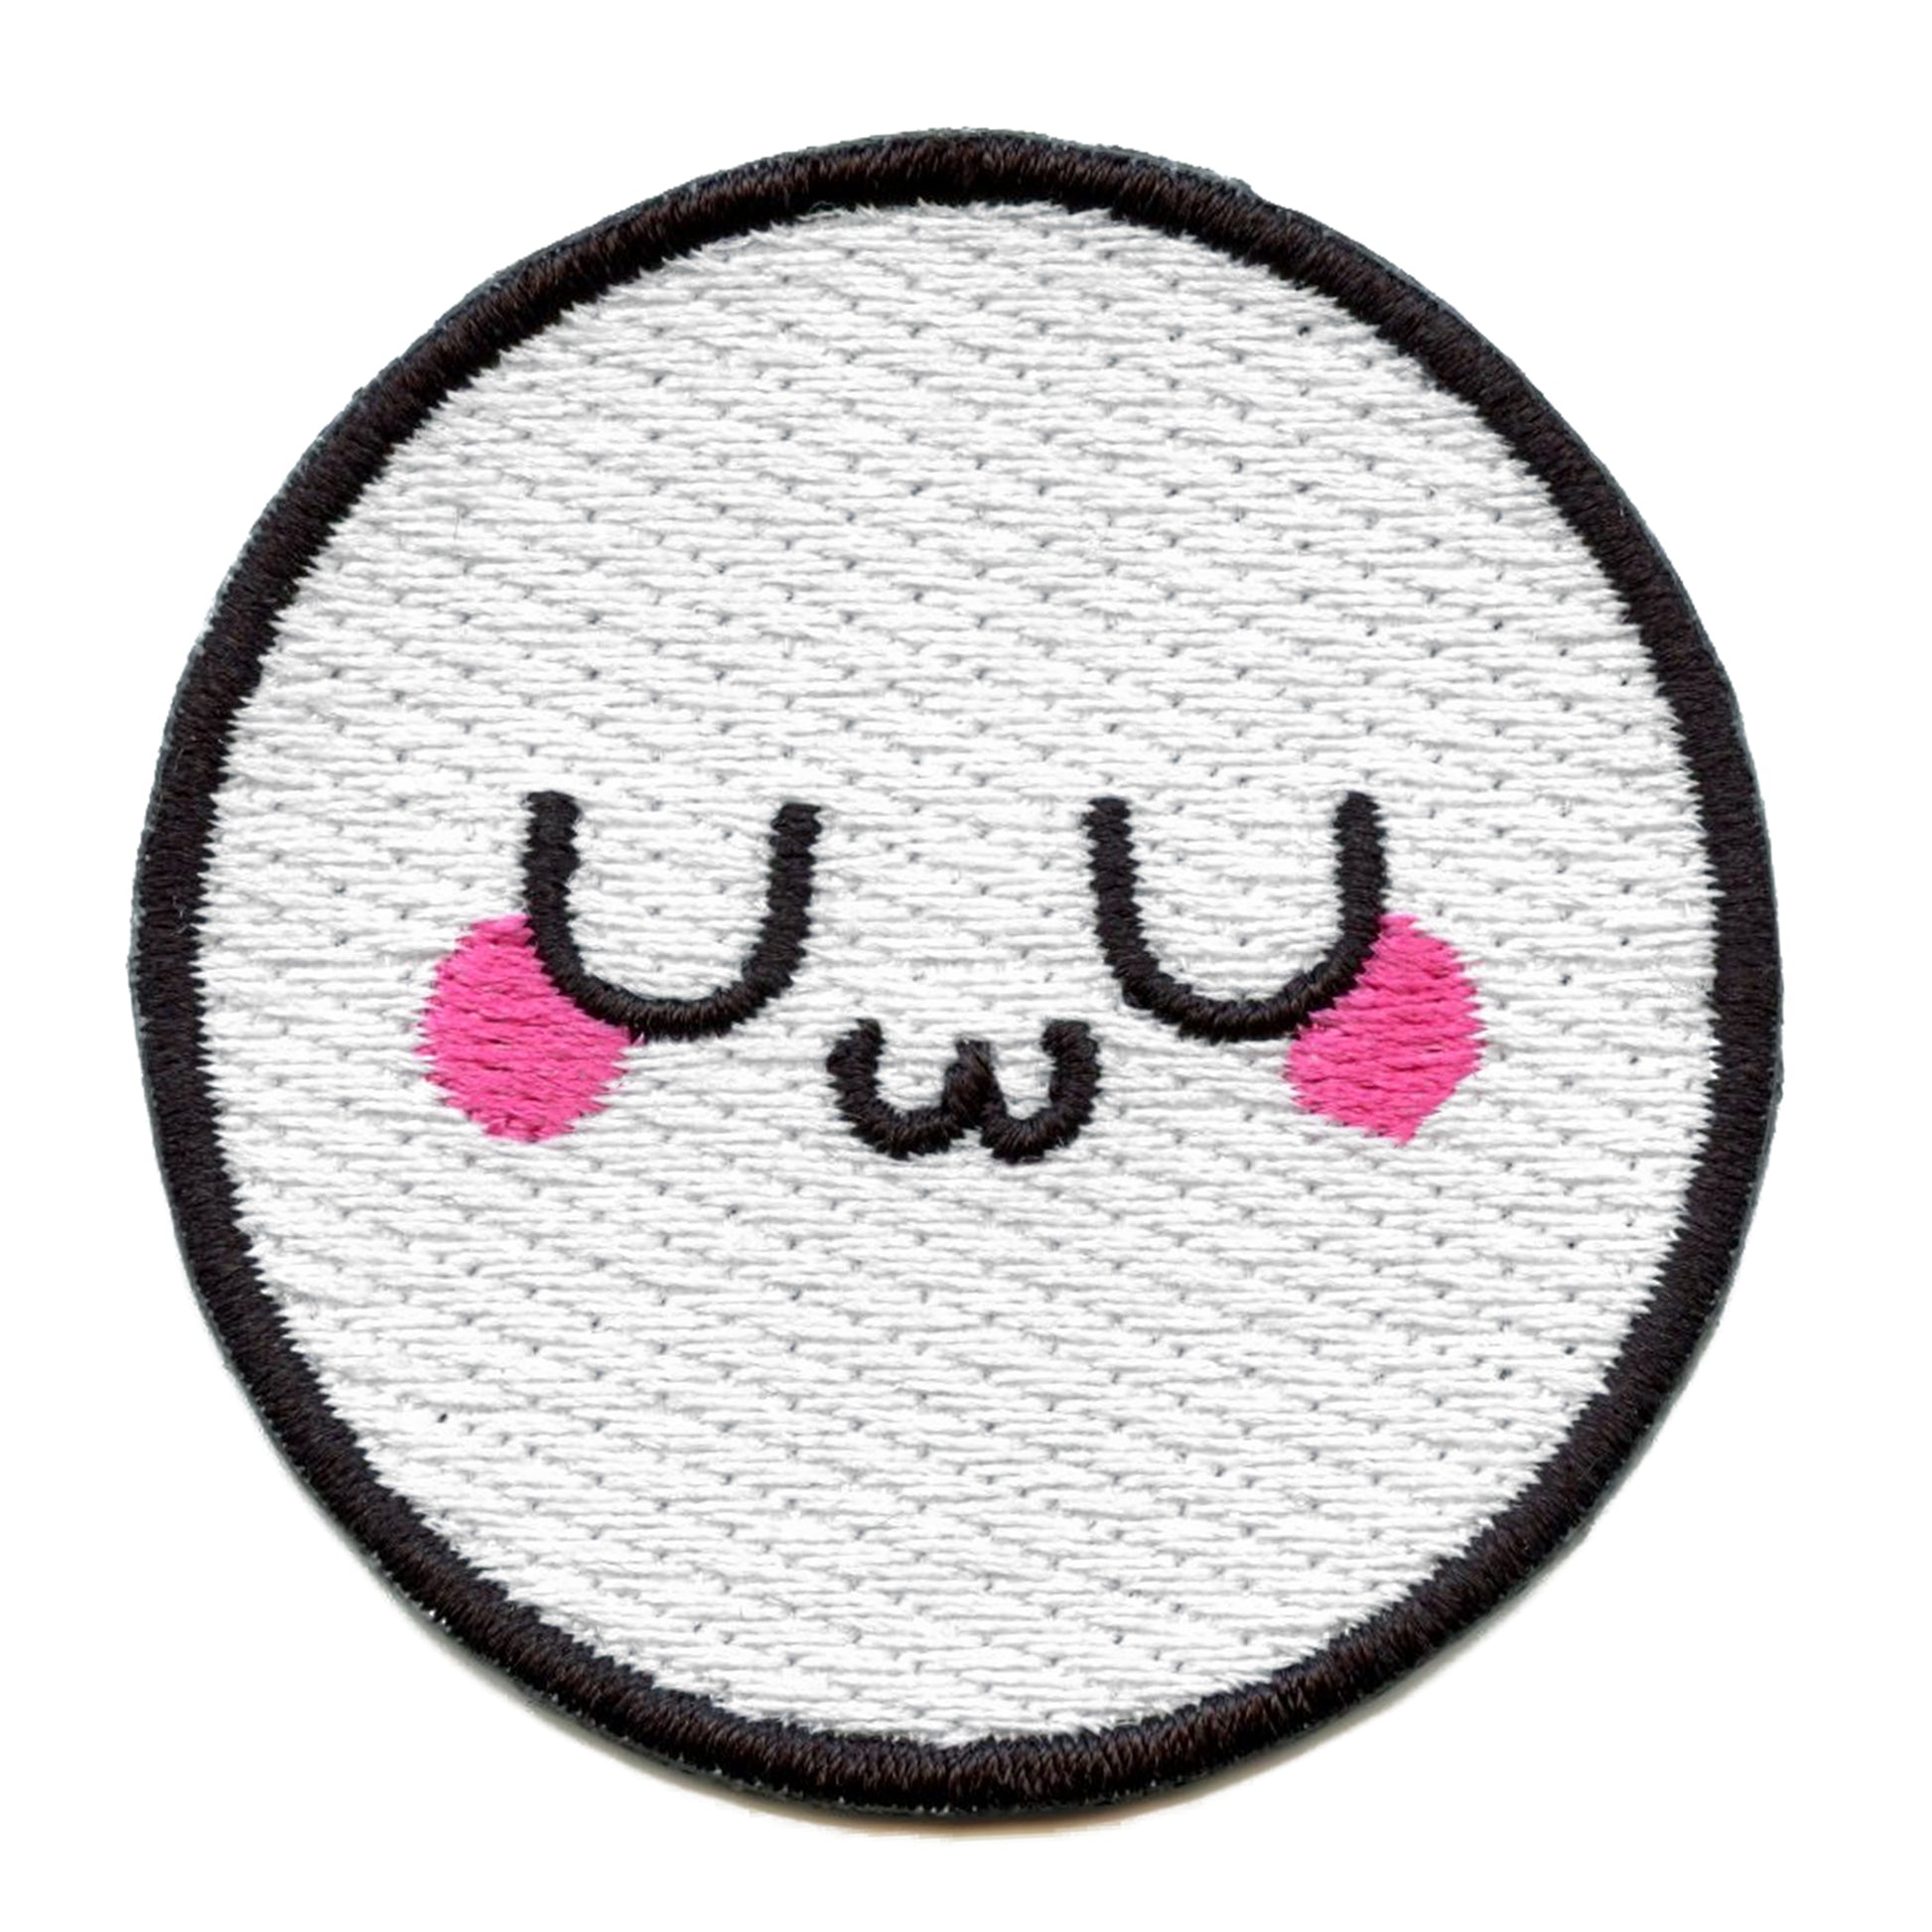 Cartoon Iron on Patch, Kawaii Japan Anime Cute Patch, Embroidered Hk  Friends, Anime Patches, Embroidered Cute Patches Anime, Kawaii Patches 